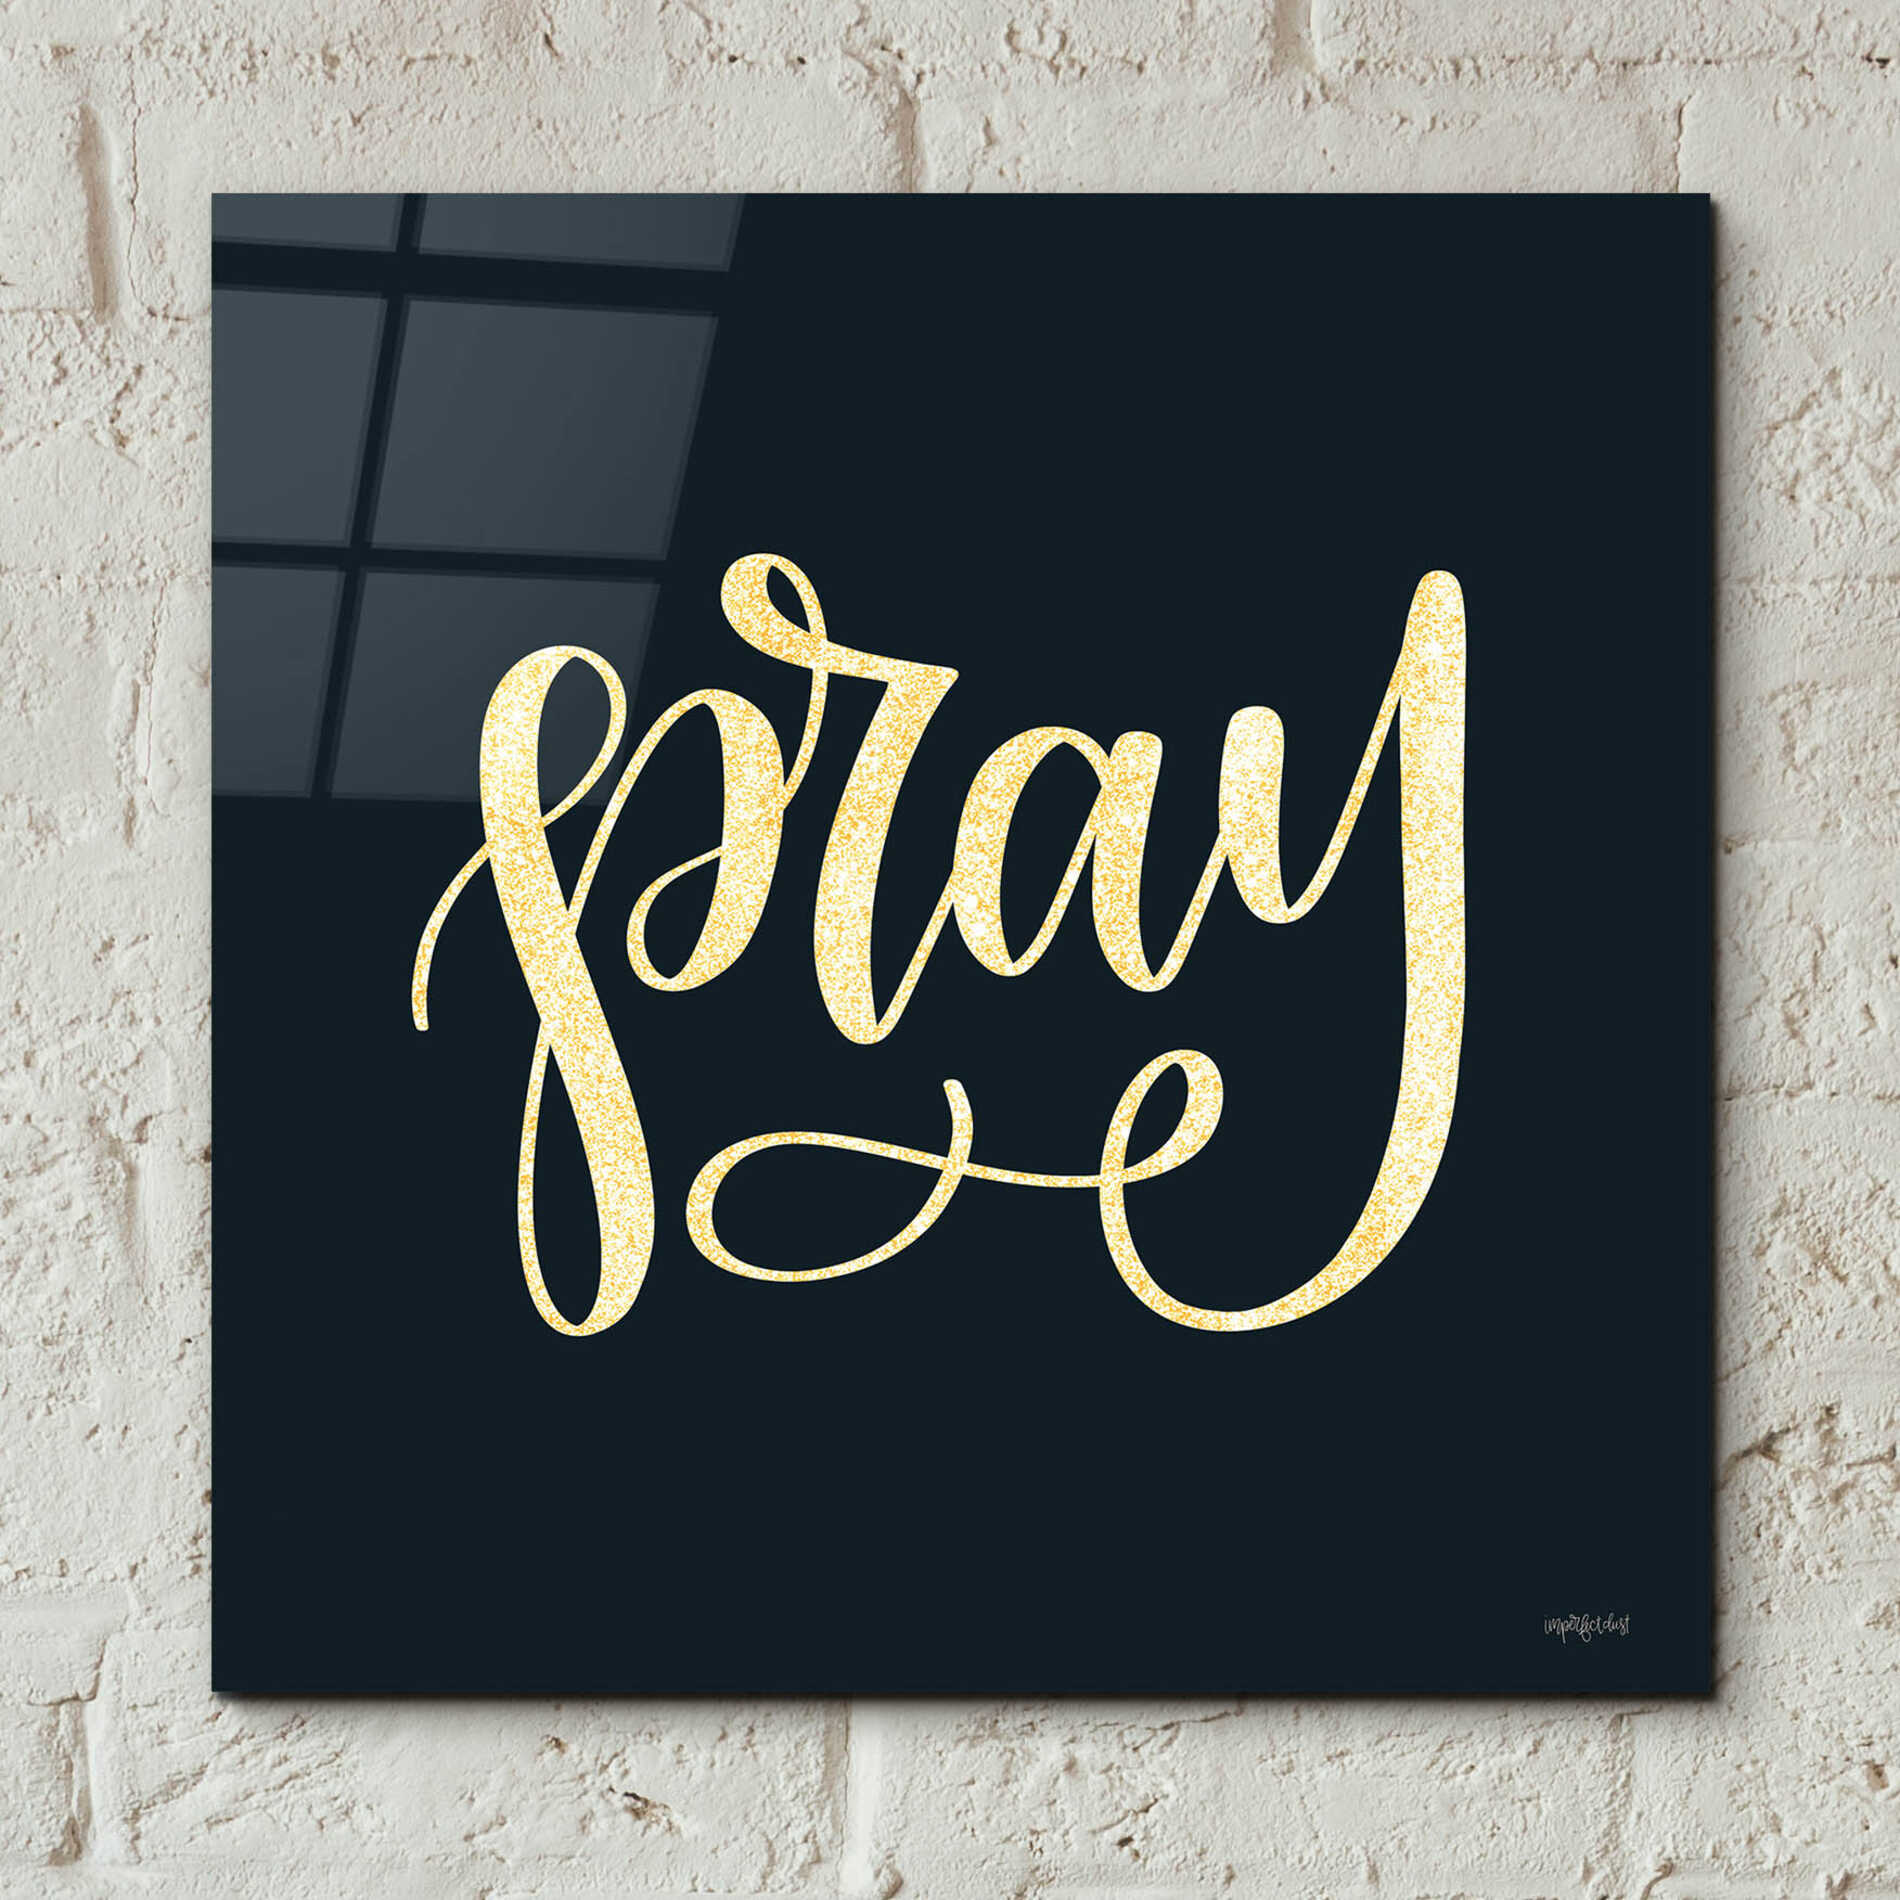 Epic Art 'Pray' by Imperfect Dust, Acrylic Glass Wall Art,12x12